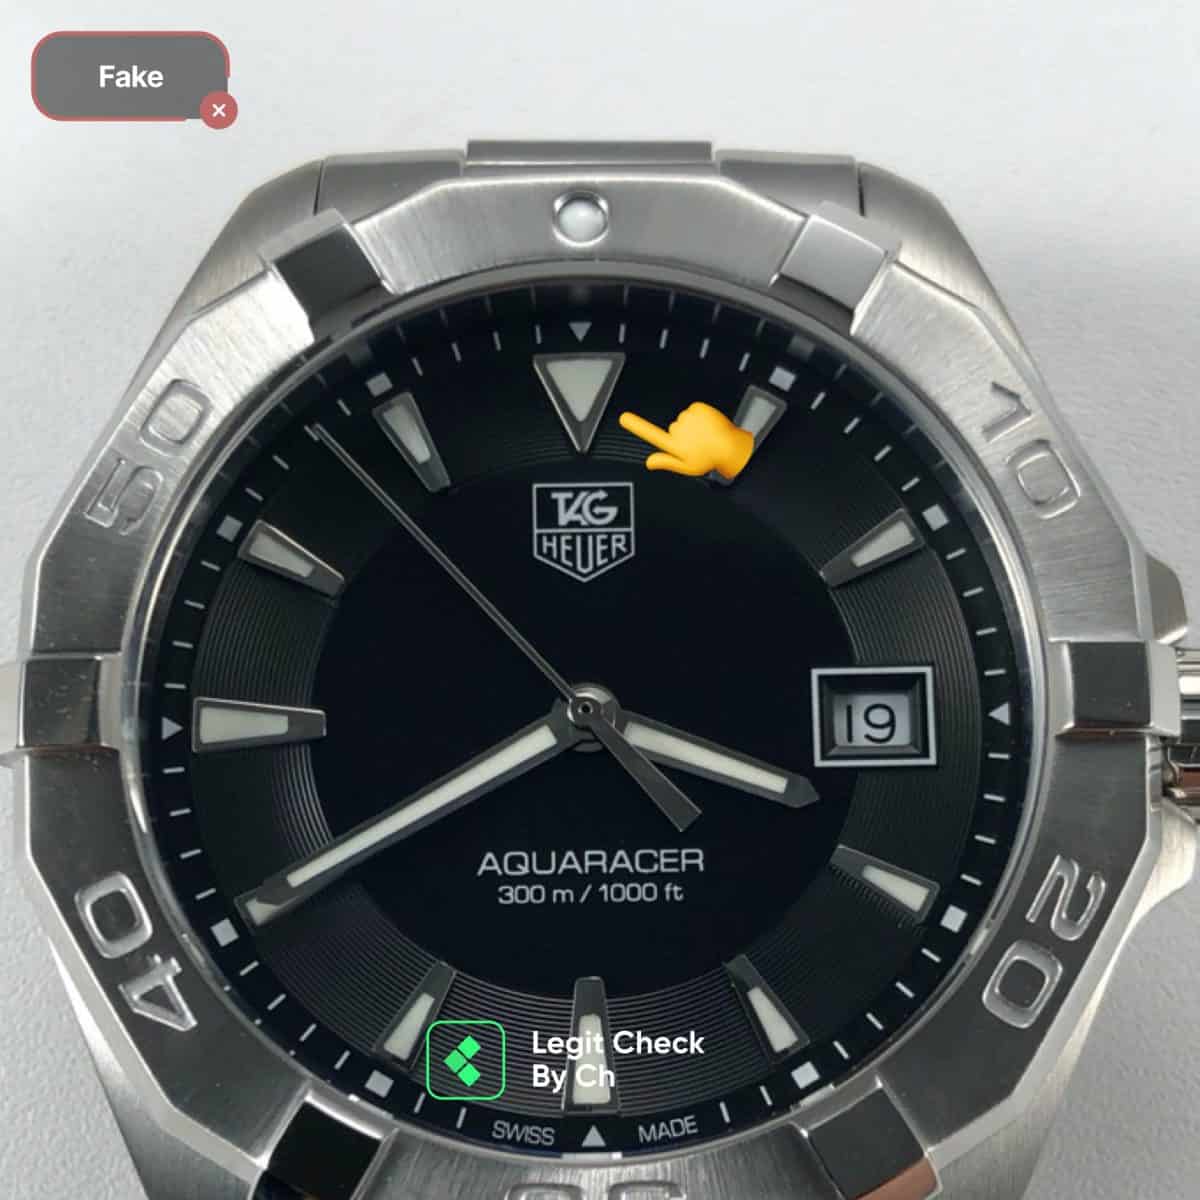 how to verify the authenticity of my tag heuer watch